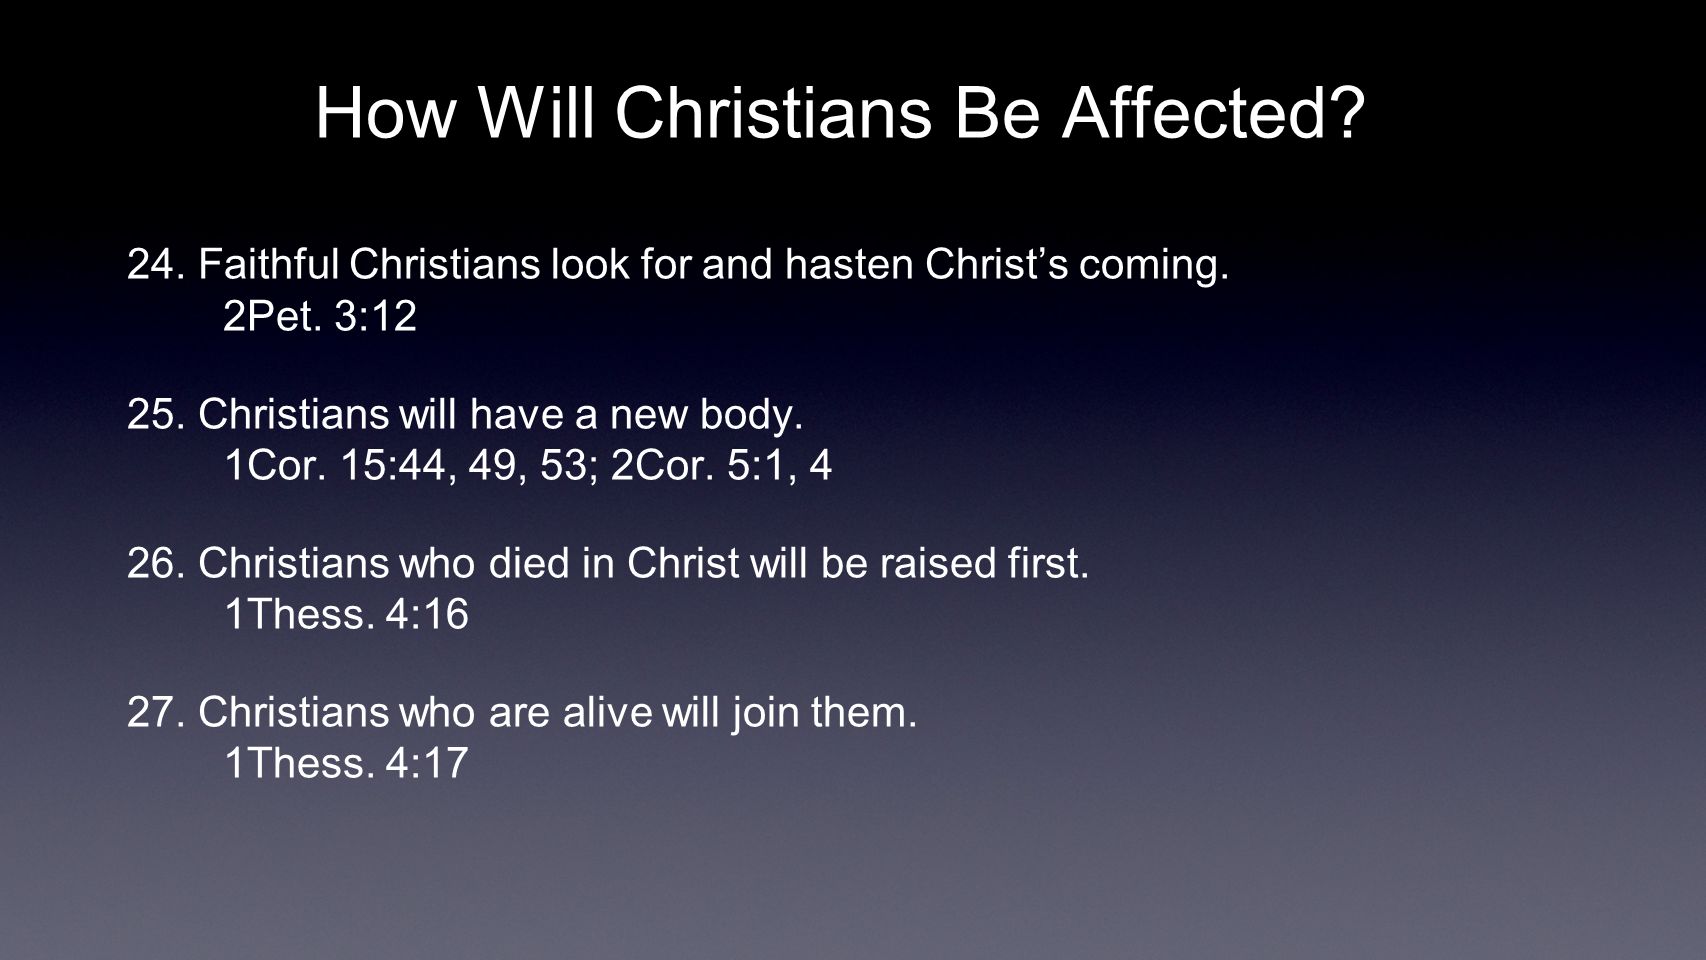 How Will Christians Be Affected. 24. Faithful Christians look for and hasten Christ’s coming.